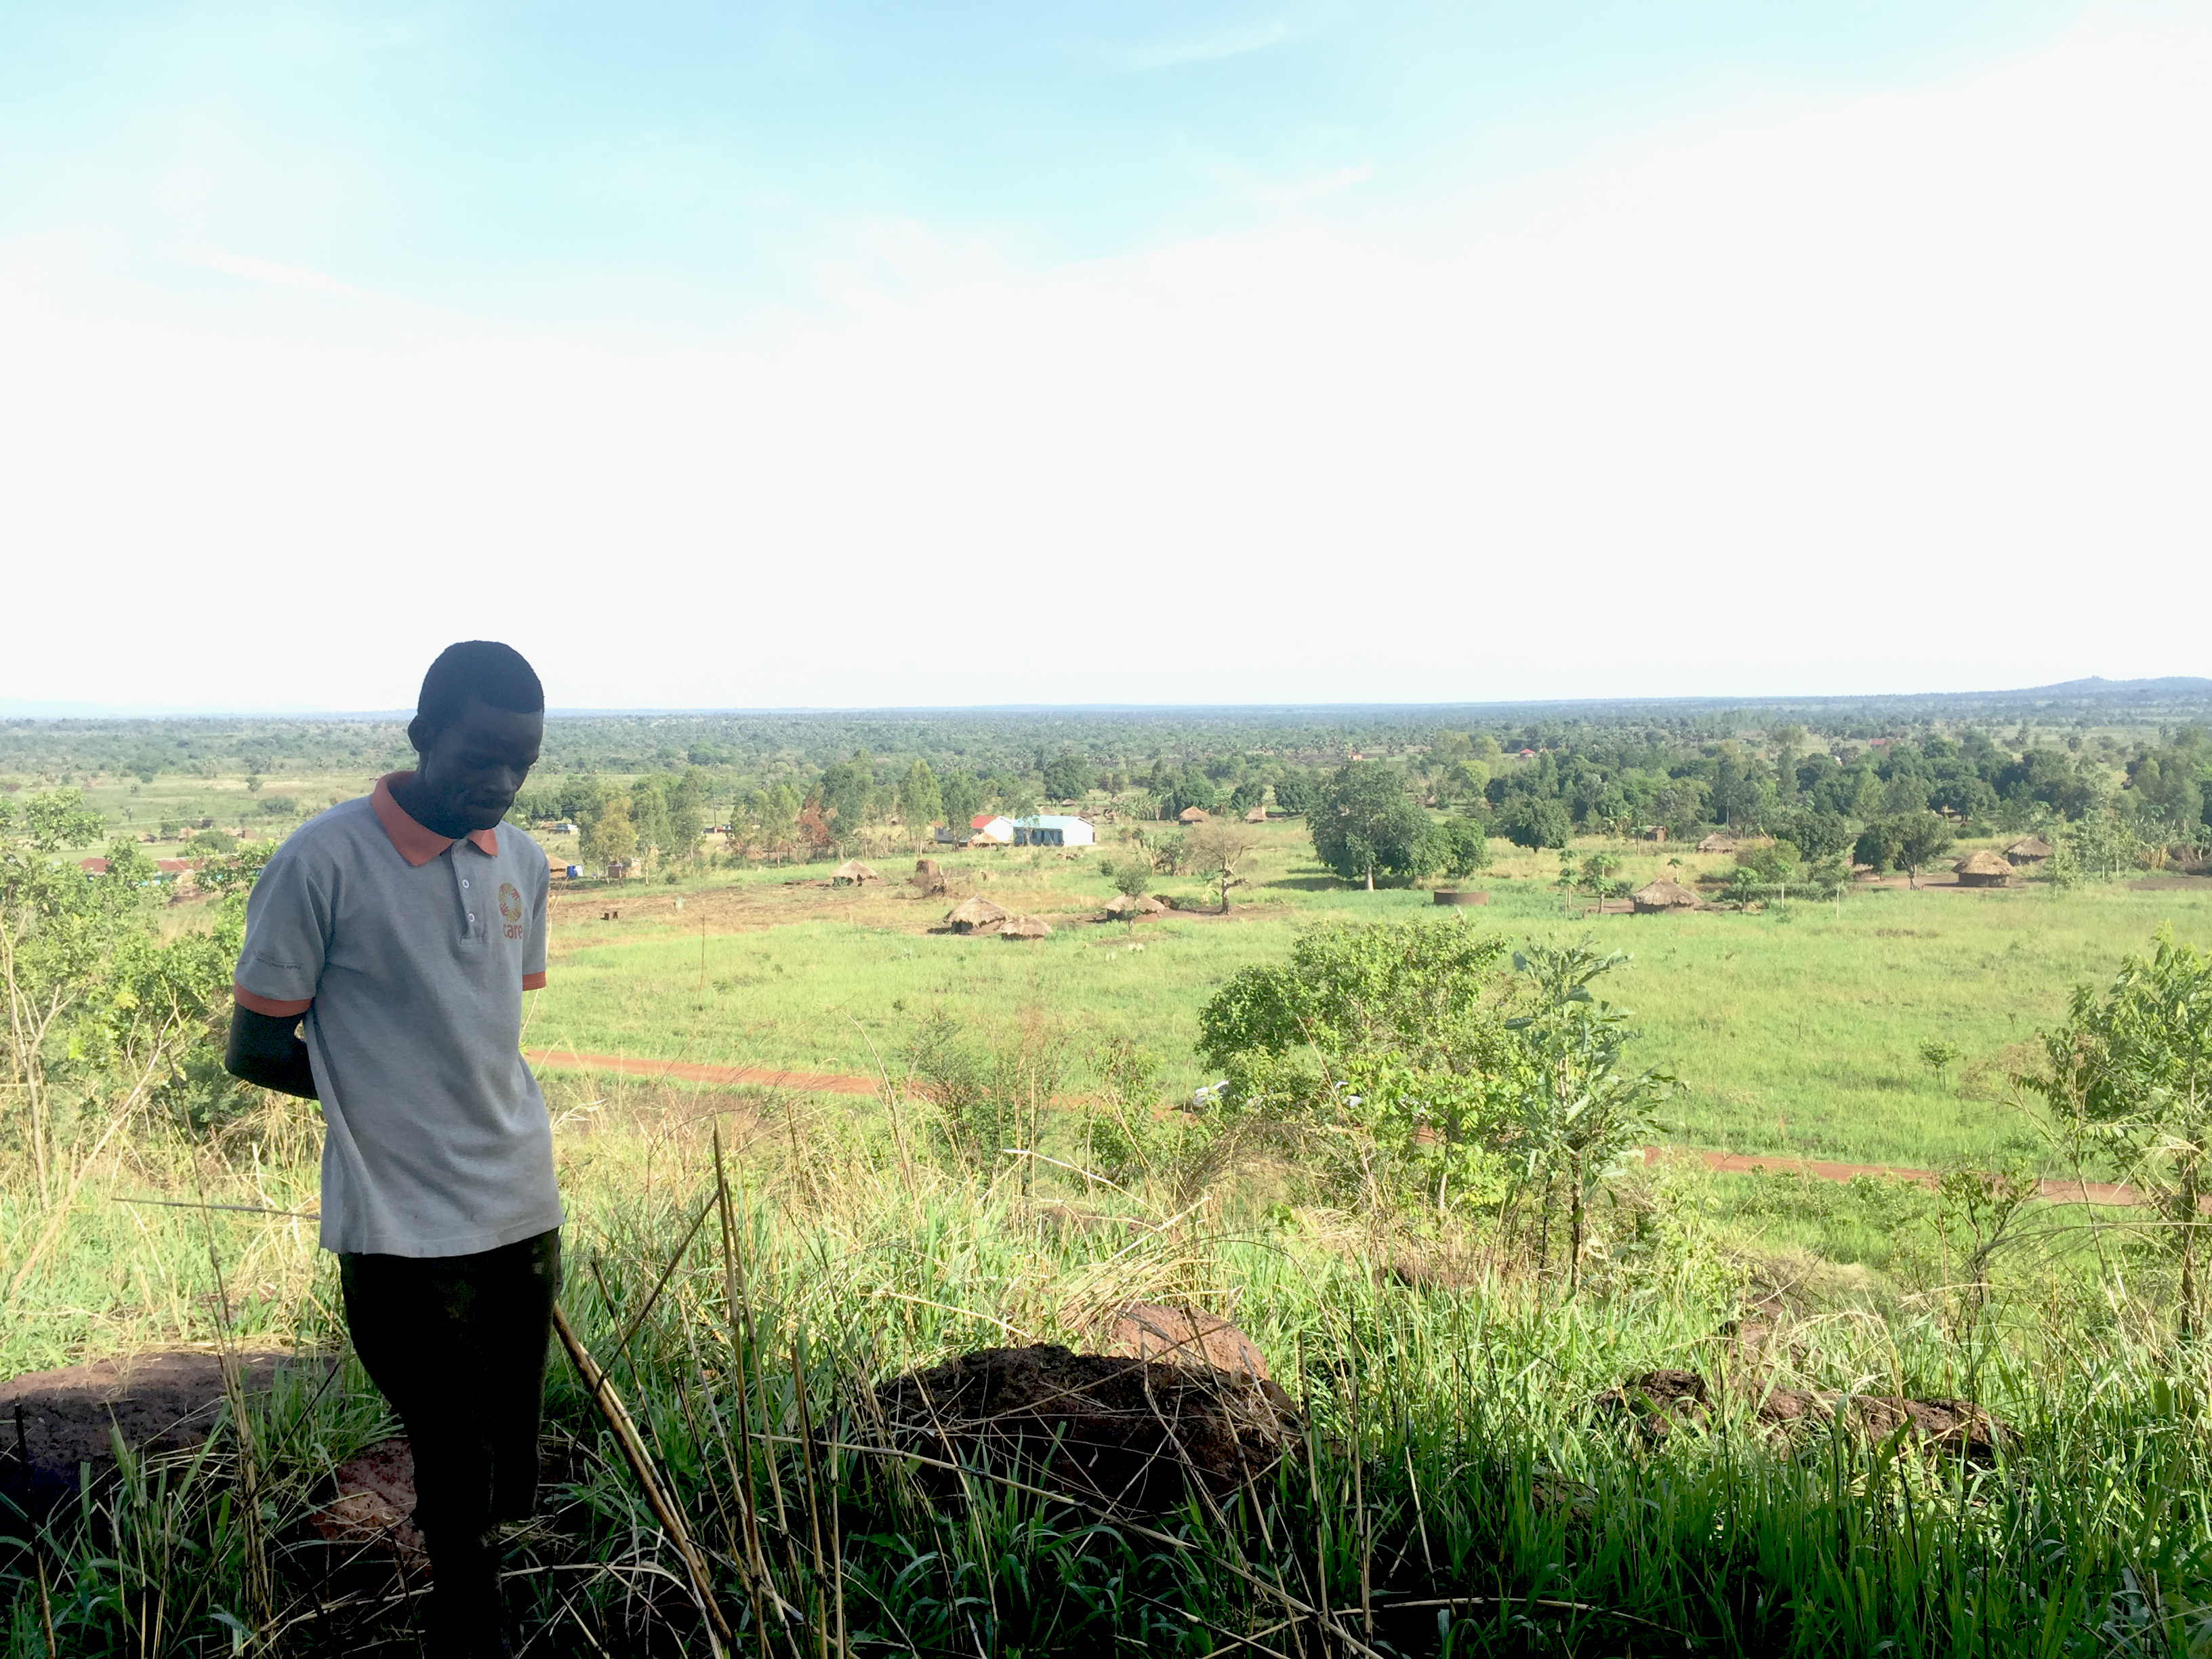 One of our hosts in Lukodi tells us about his experience on a hill overlooking his home.